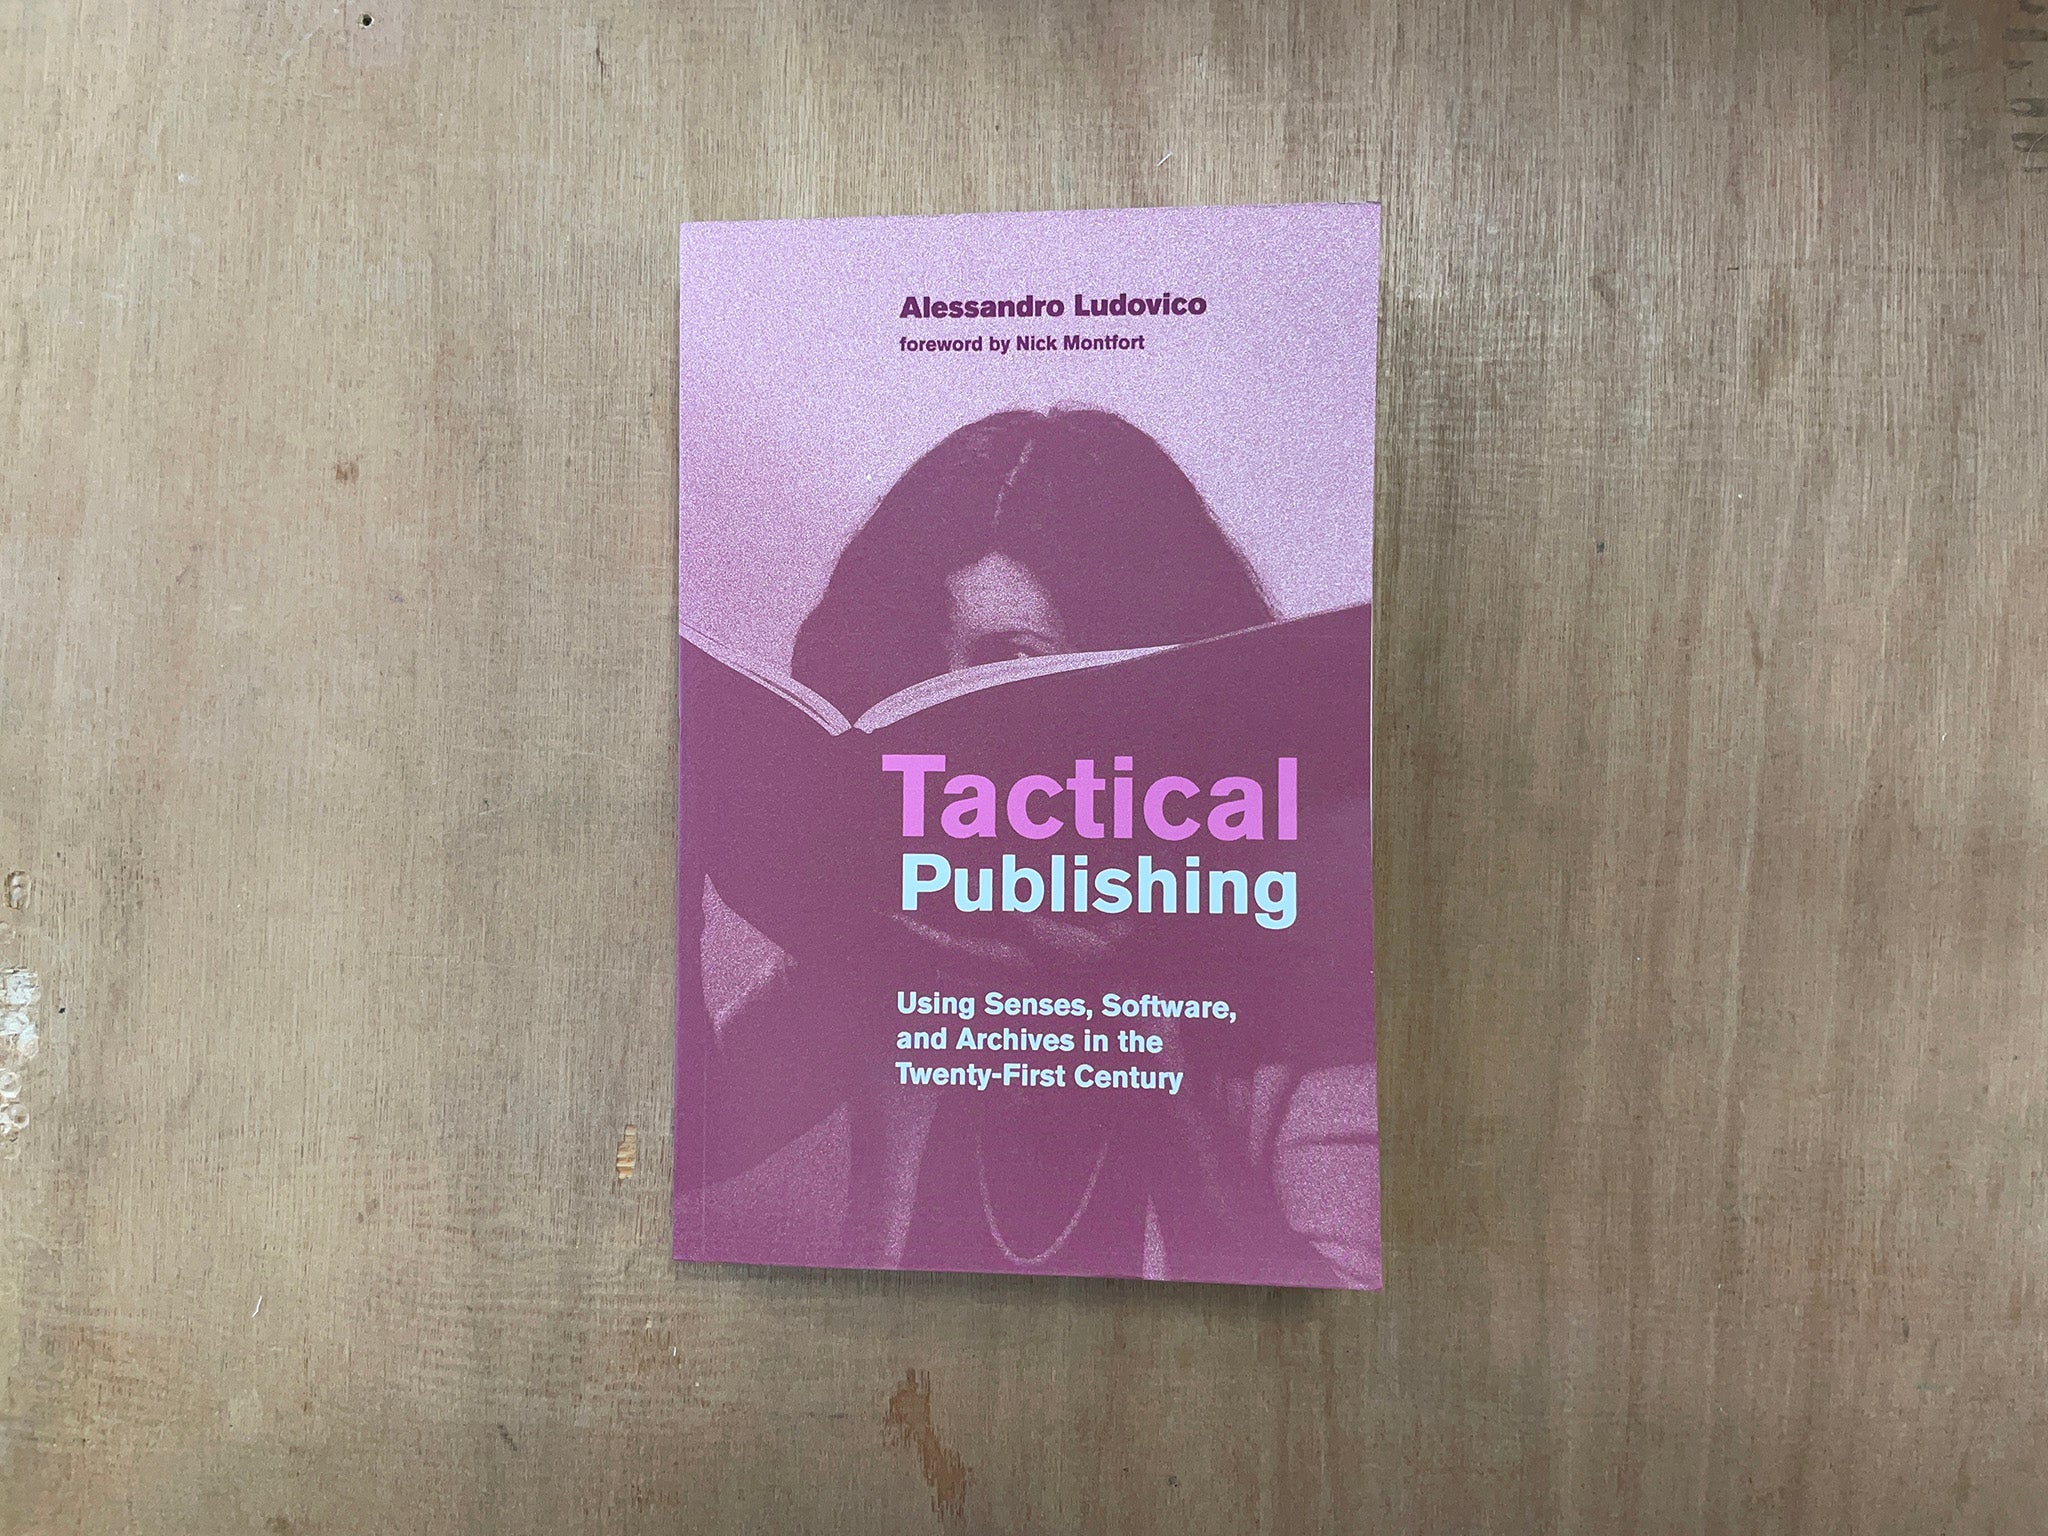 TACTICAL PUBLISHING: USING SENSES, SOFTWARE, AND ARCHIVES IN THE TWENTY-FIRST CENTURY by Alessandro Ludovico